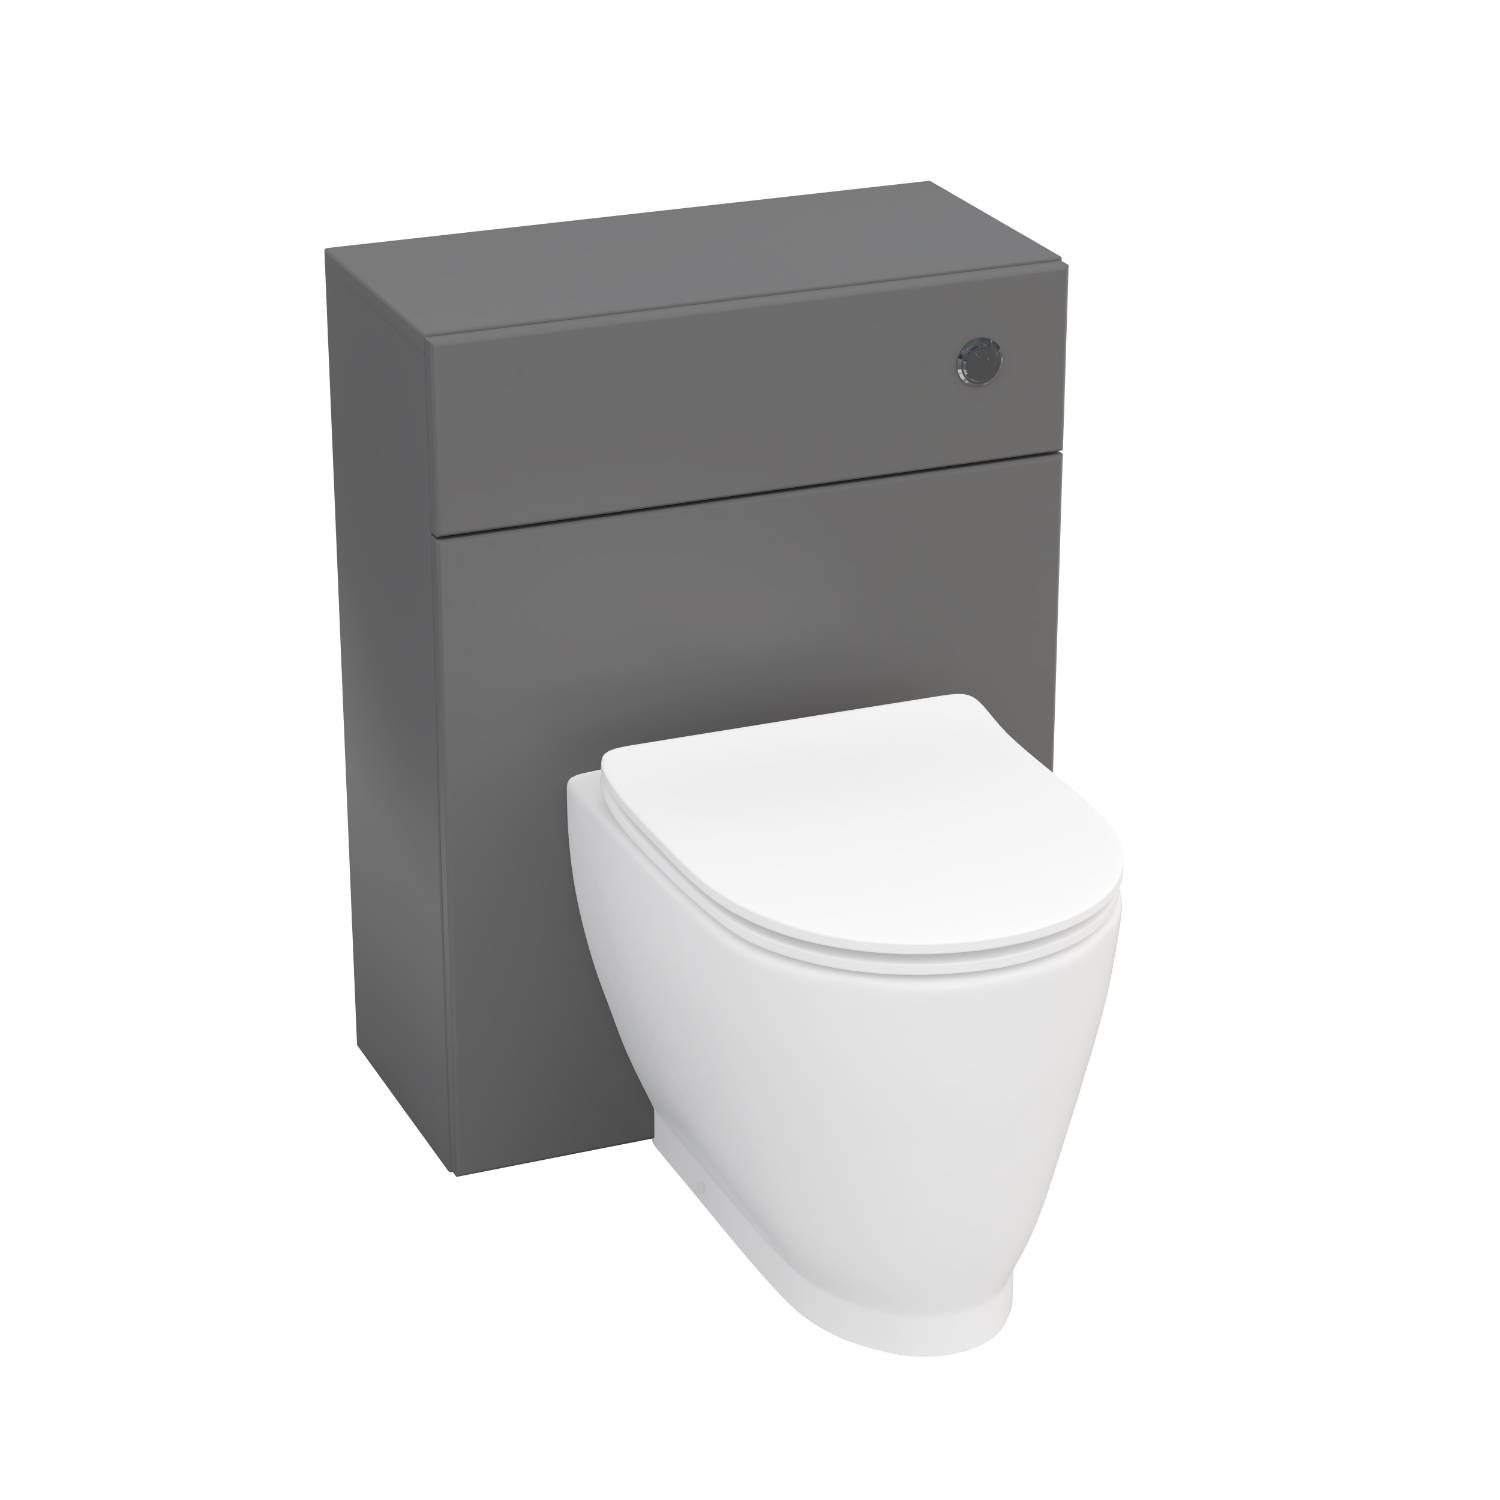 Designer Series 4 back to wall WC set including soft close seat